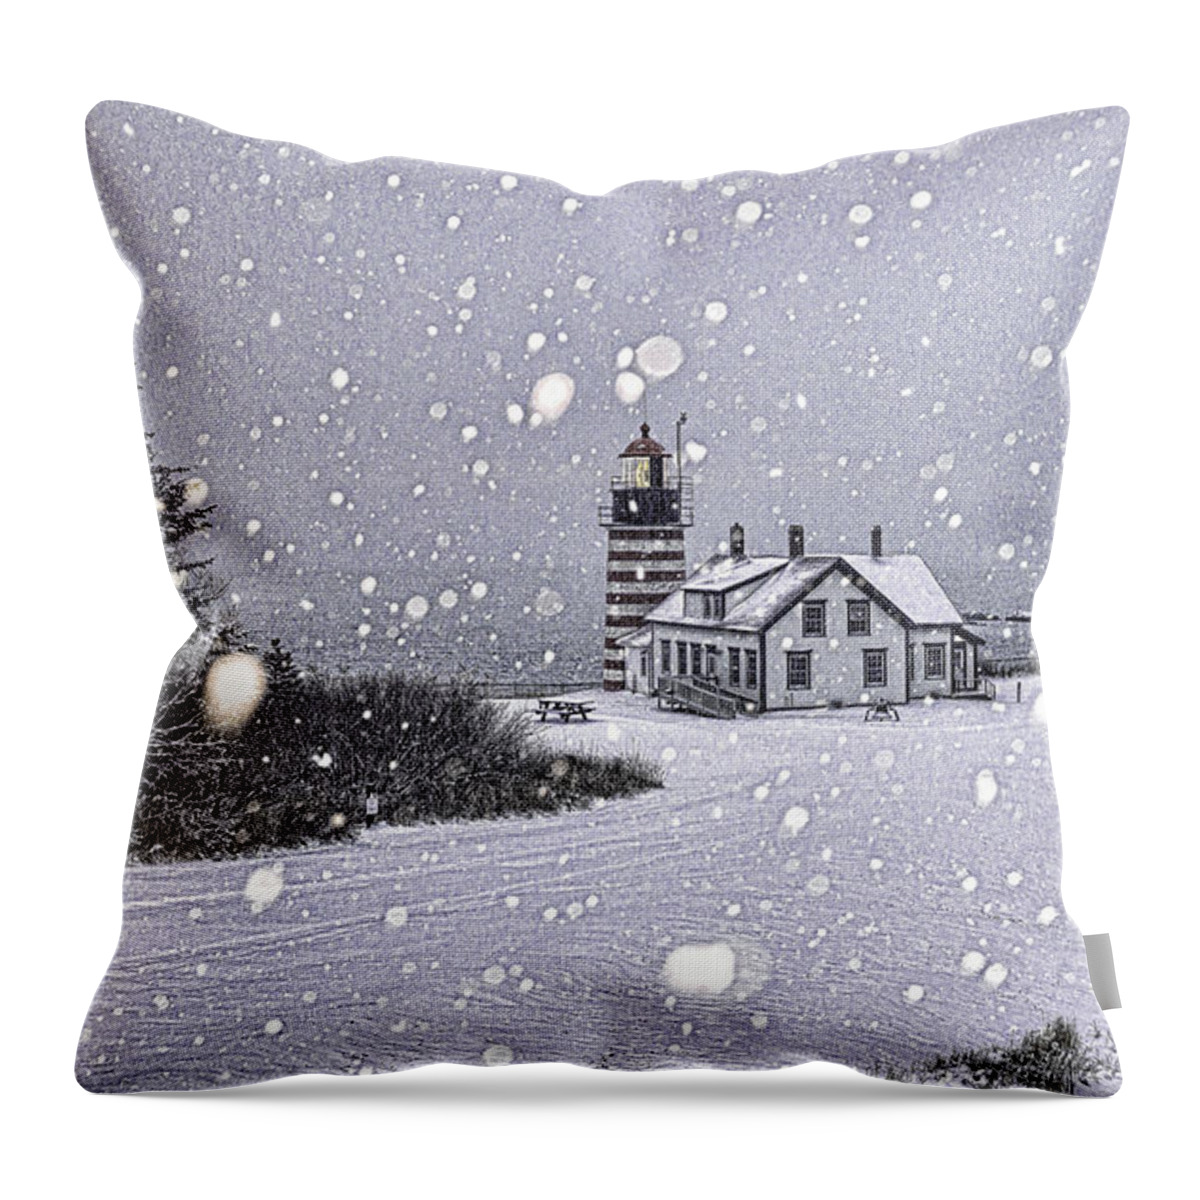 Snowing At West Quoddy Head Lighthouse Throw Pillow featuring the photograph Snowing at West Quoddy Head Lighthouse by Marty Saccone